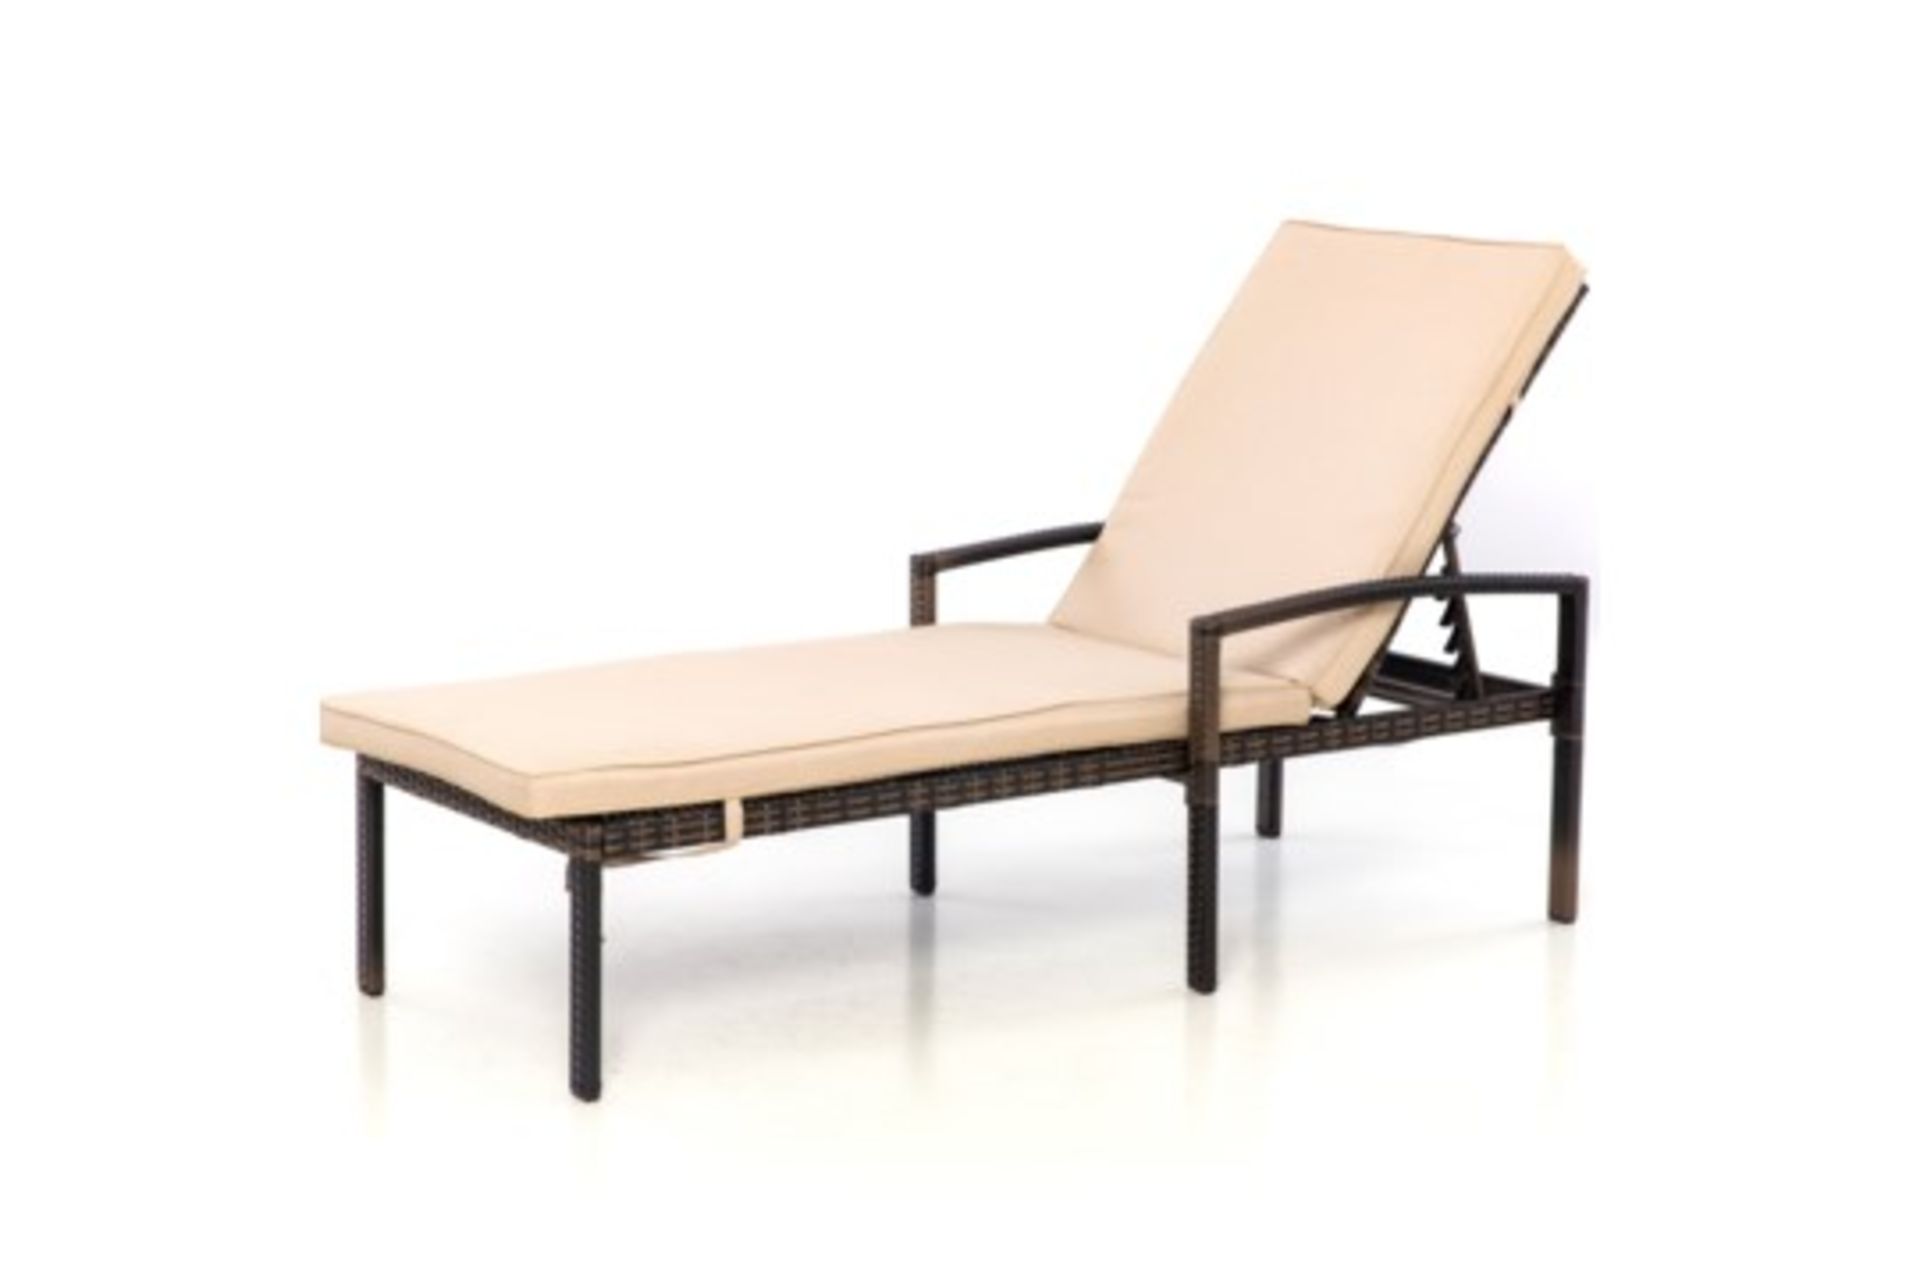 Rattan Austin Sunlounger (Brown) *BRAND NEW* - Image 3 of 3